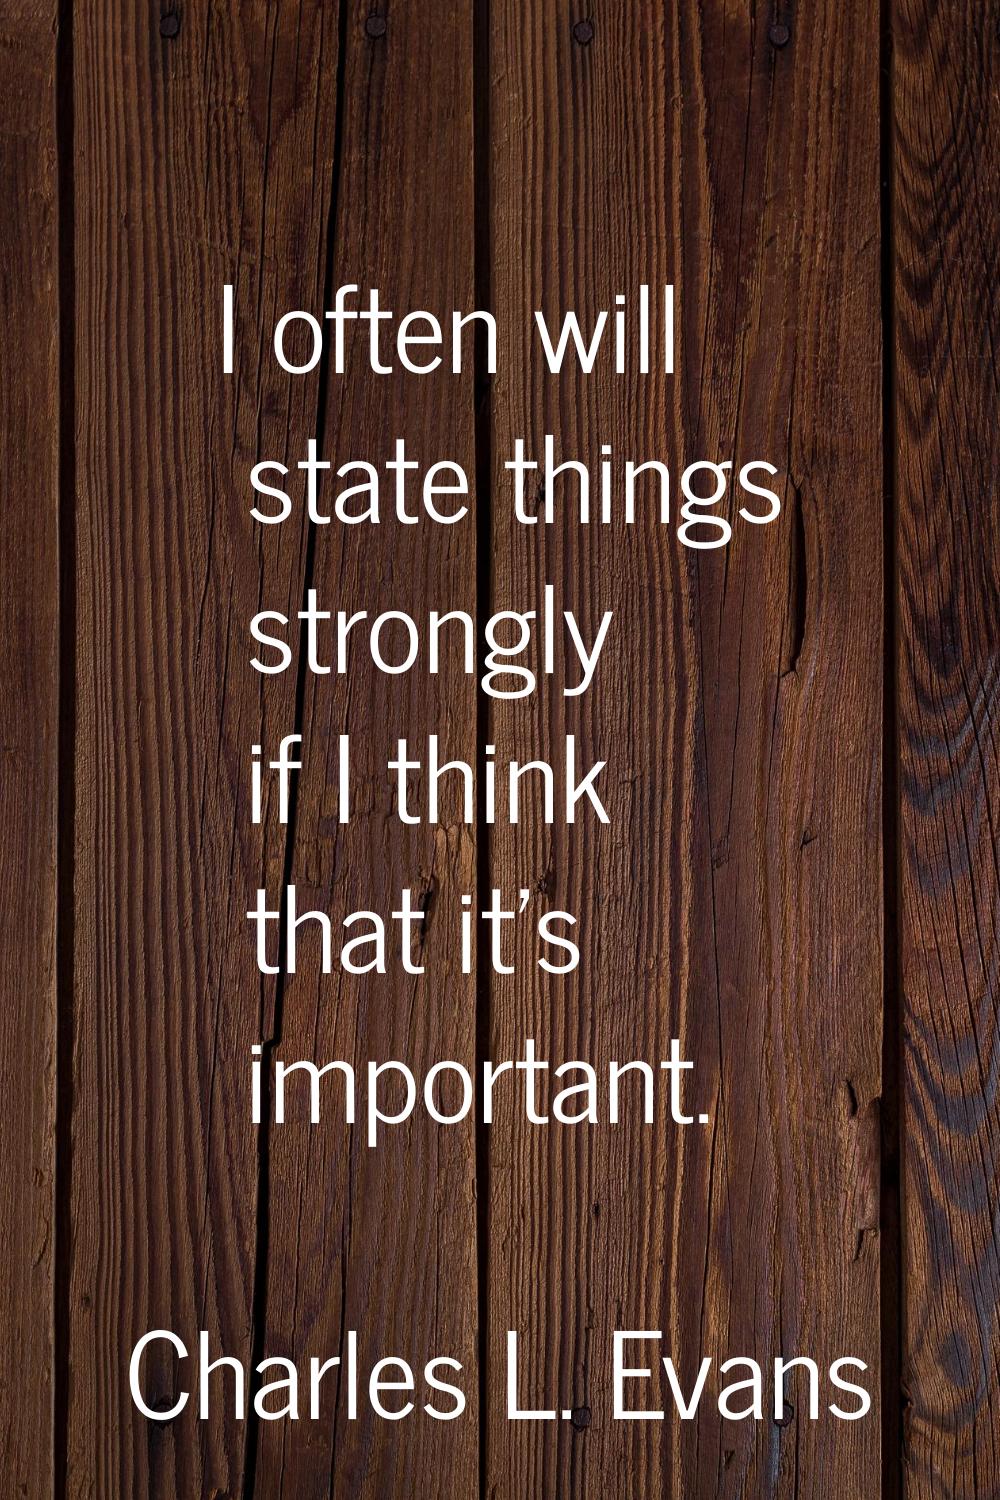 I often will state things strongly if I think that it's important.